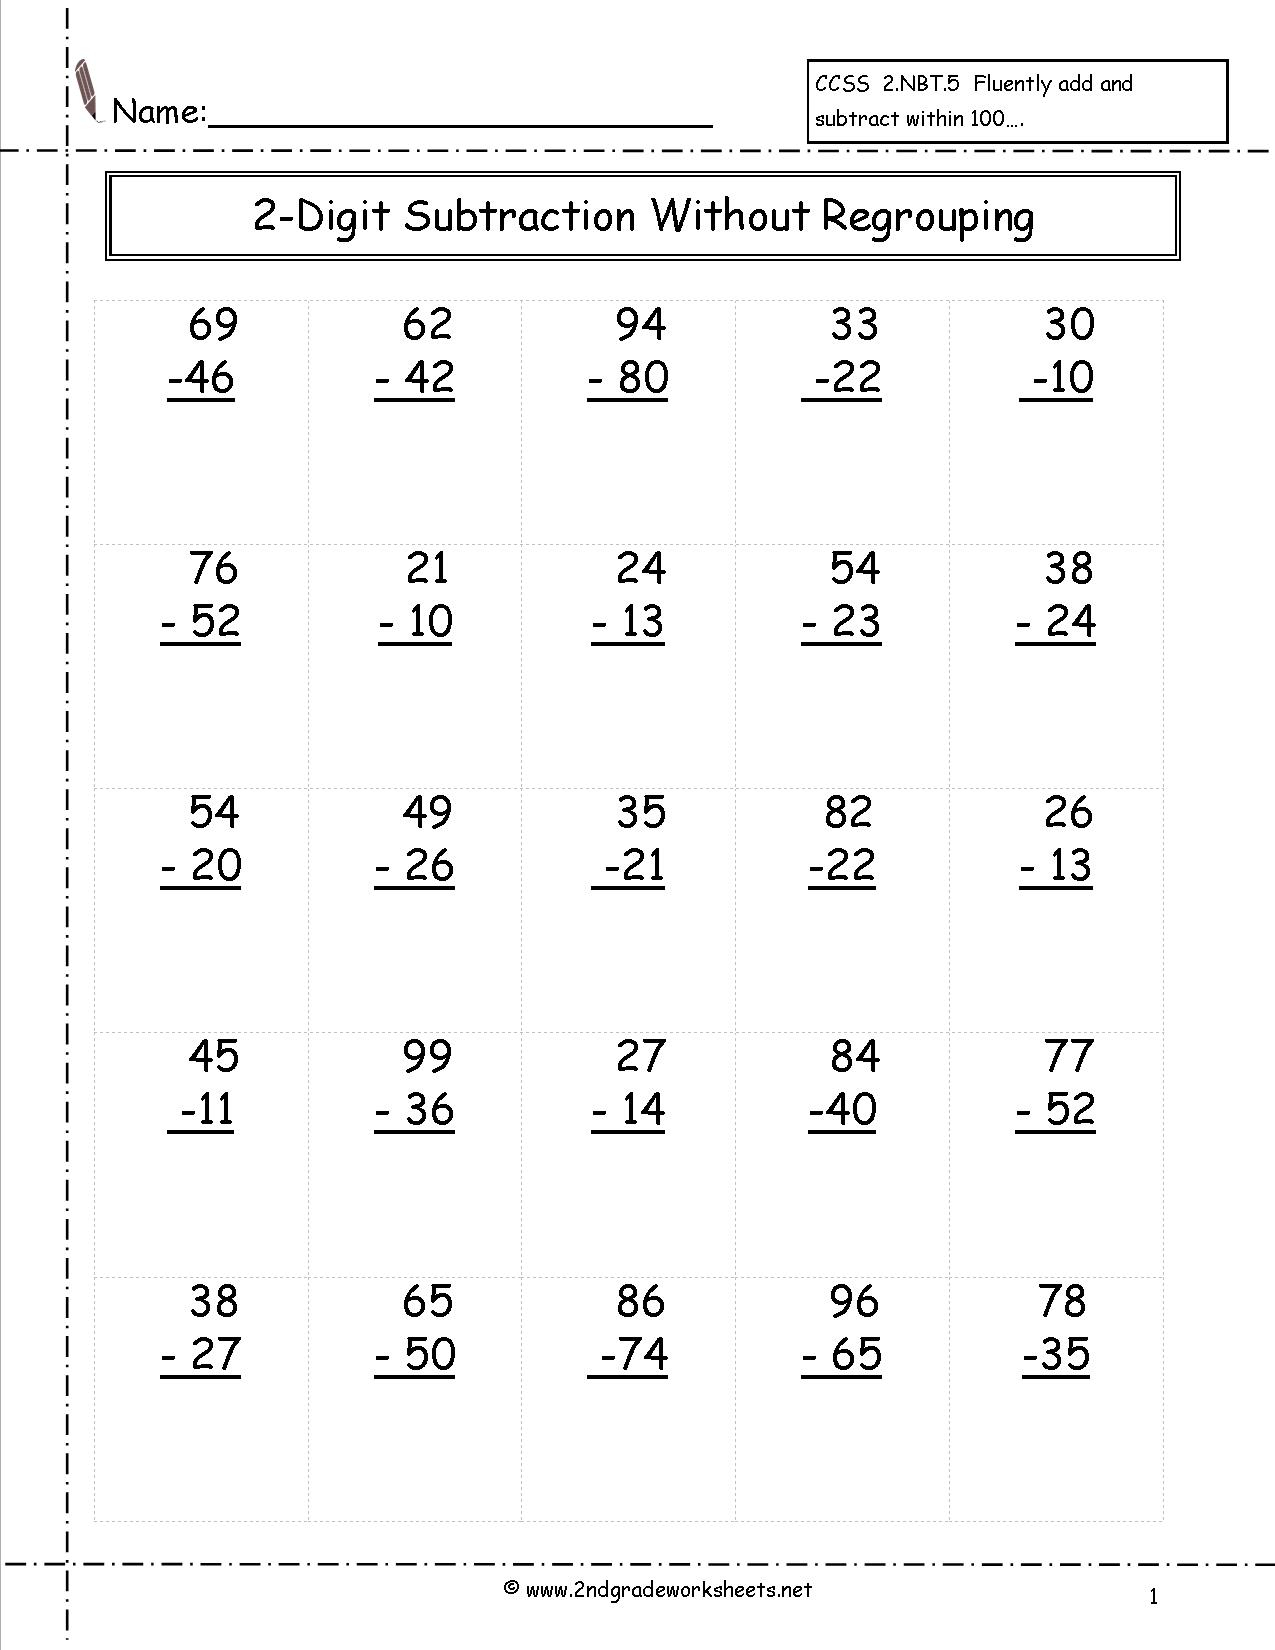 Two Digit Subtraction Worksheets | Printable Subtraction Worksheets With Regrouping